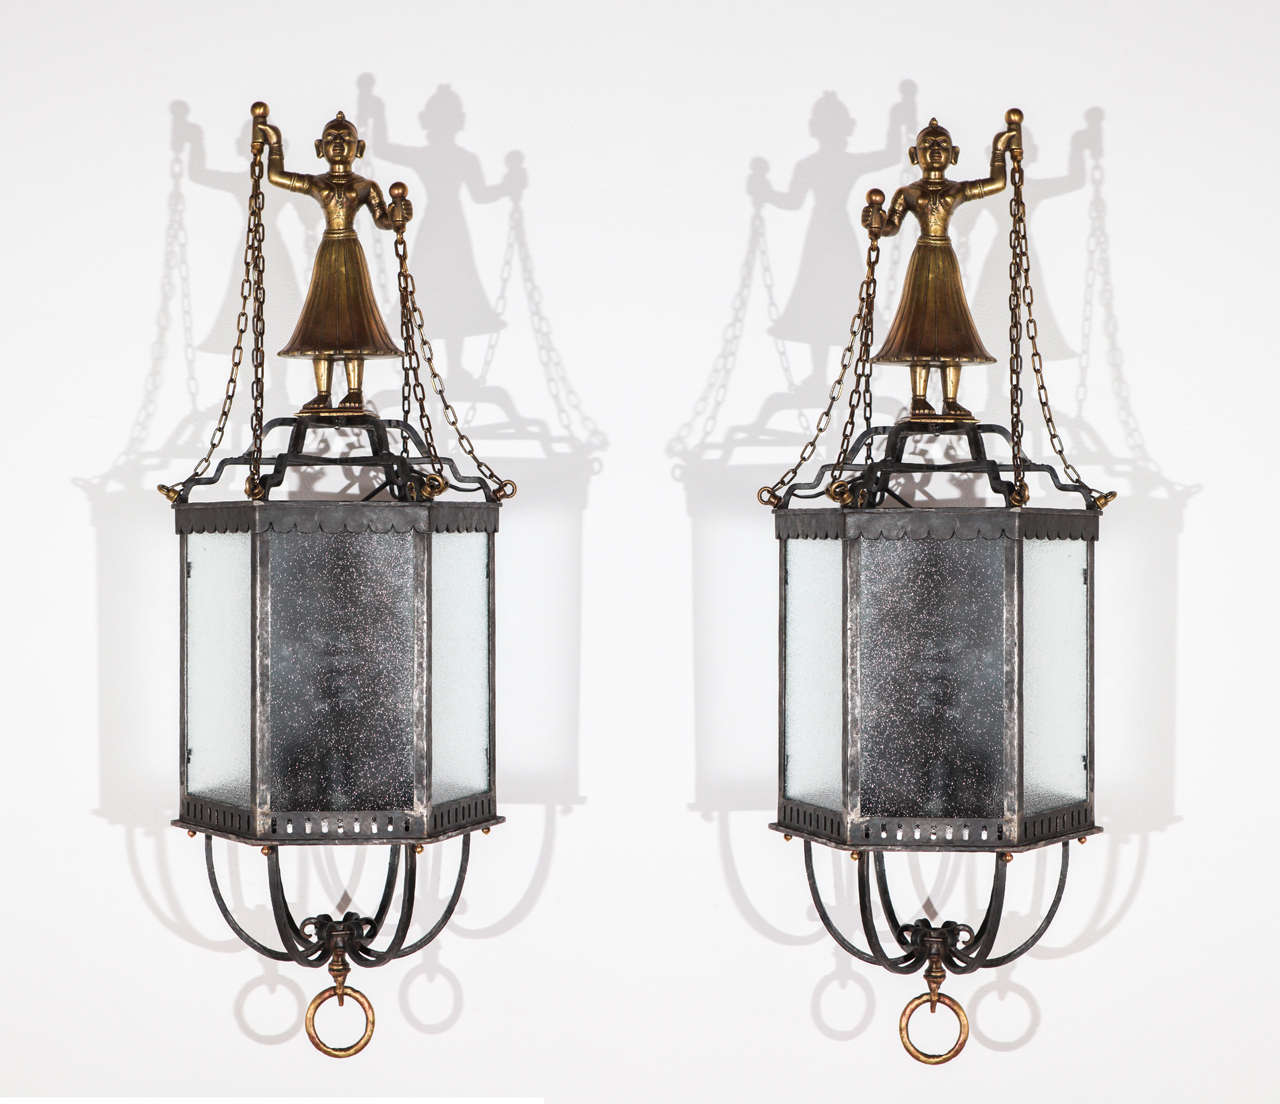 A pair of fantastic iron and brass figural carriage lanterns newly rewired for one standard bulb.